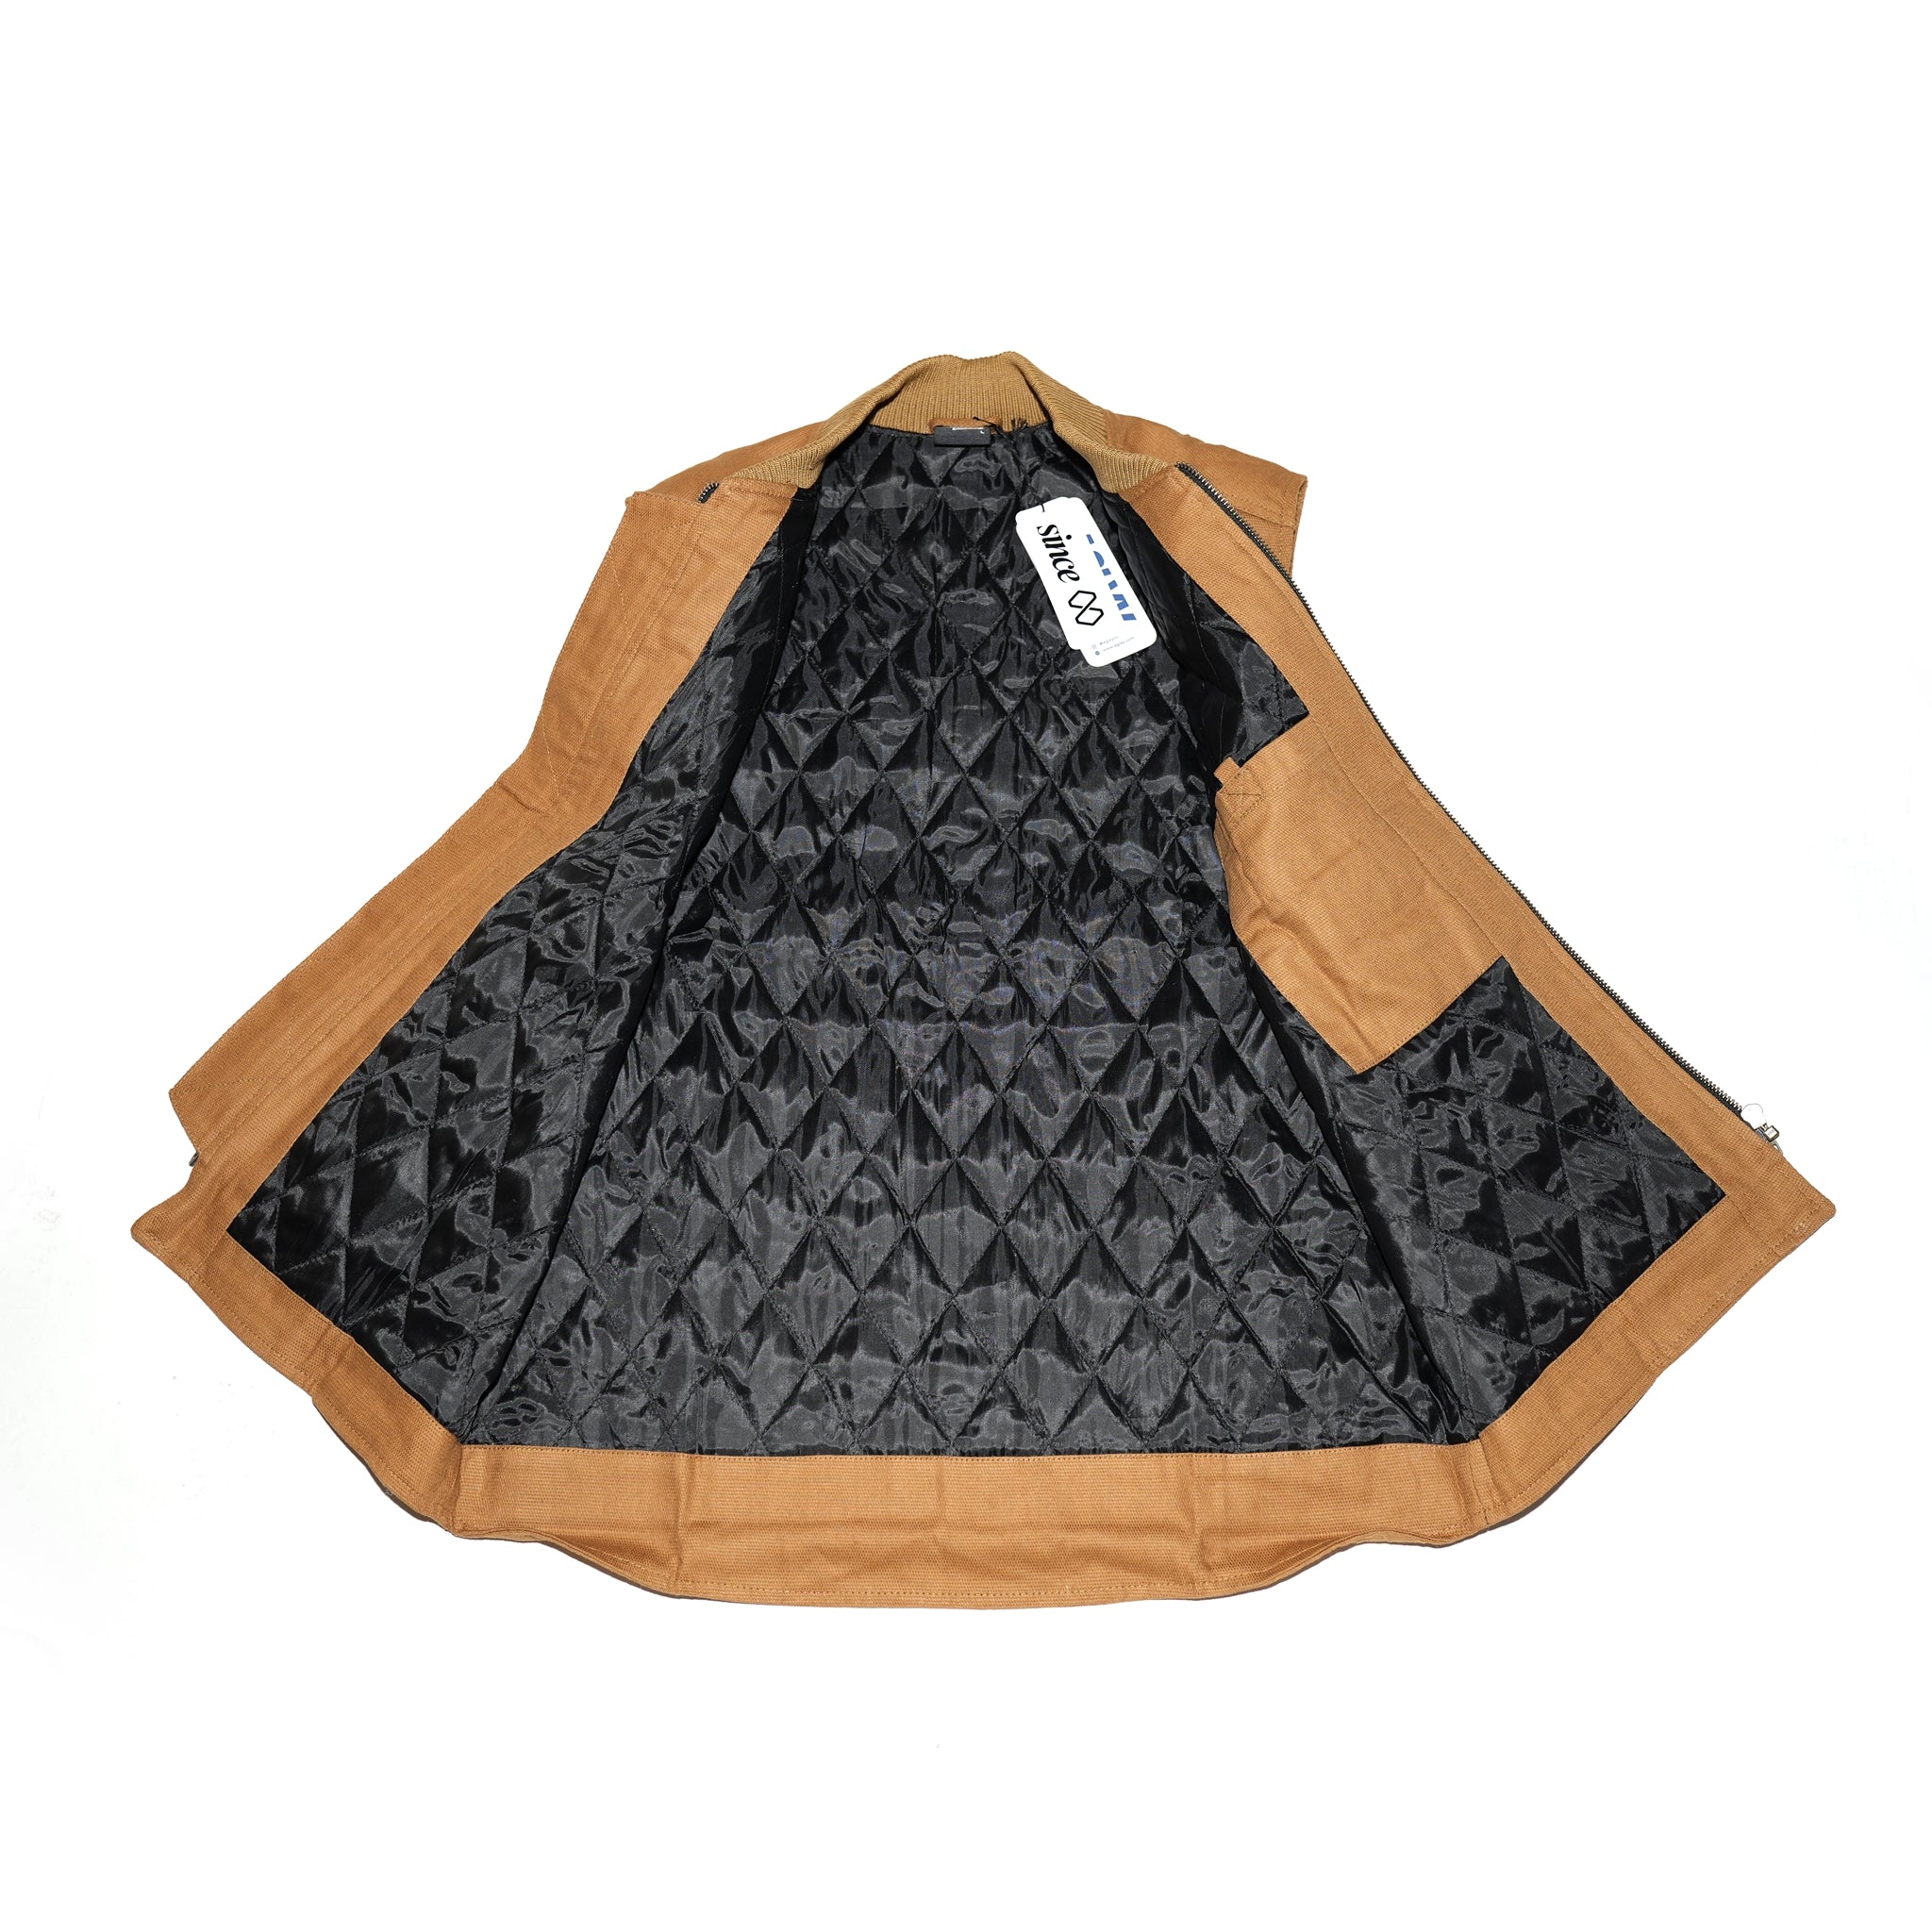 No:JAAG031 | Name:AGLXY Basic Canvas Vest 015 | Color:Brown【AGELESS GALAXY_エイジレスギャラクシー】